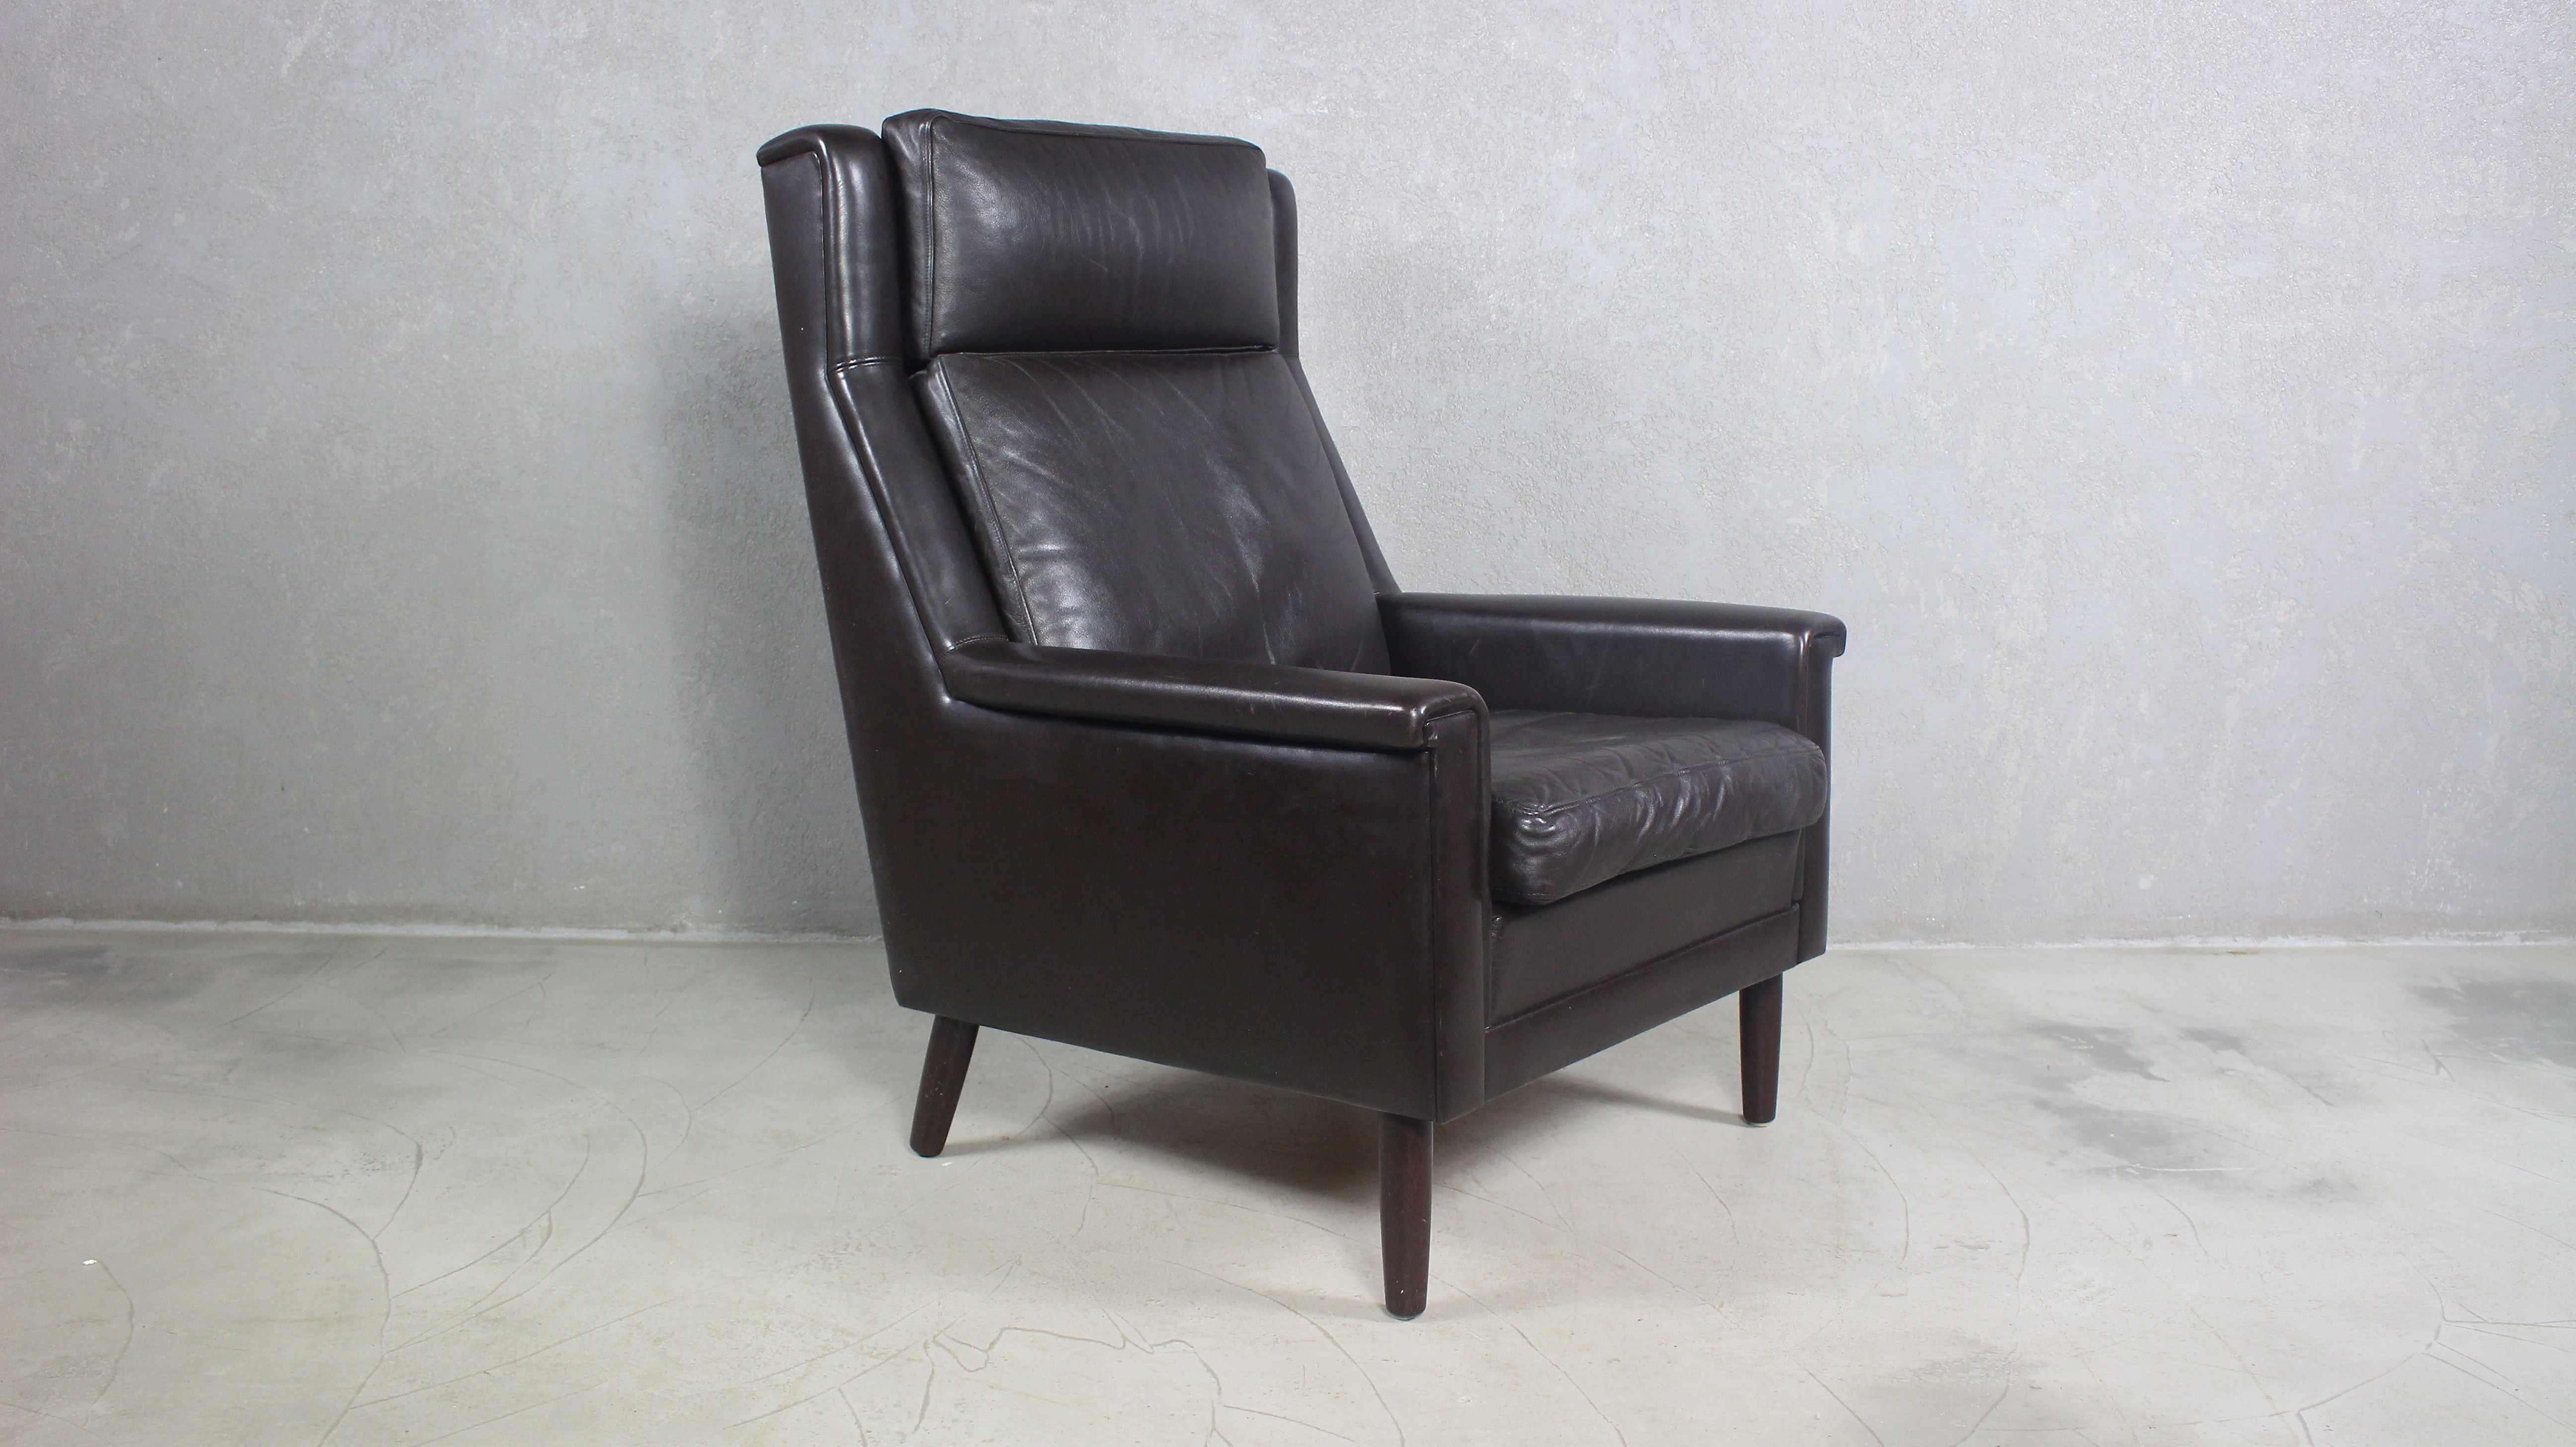 Black Leather Chair by Georg Thams.
Danish Vintage Lounge Chair from 1960 s.
Produced in Denmark.
It is made of black leather and wooden legs.
Beautiful light patina on the leather.